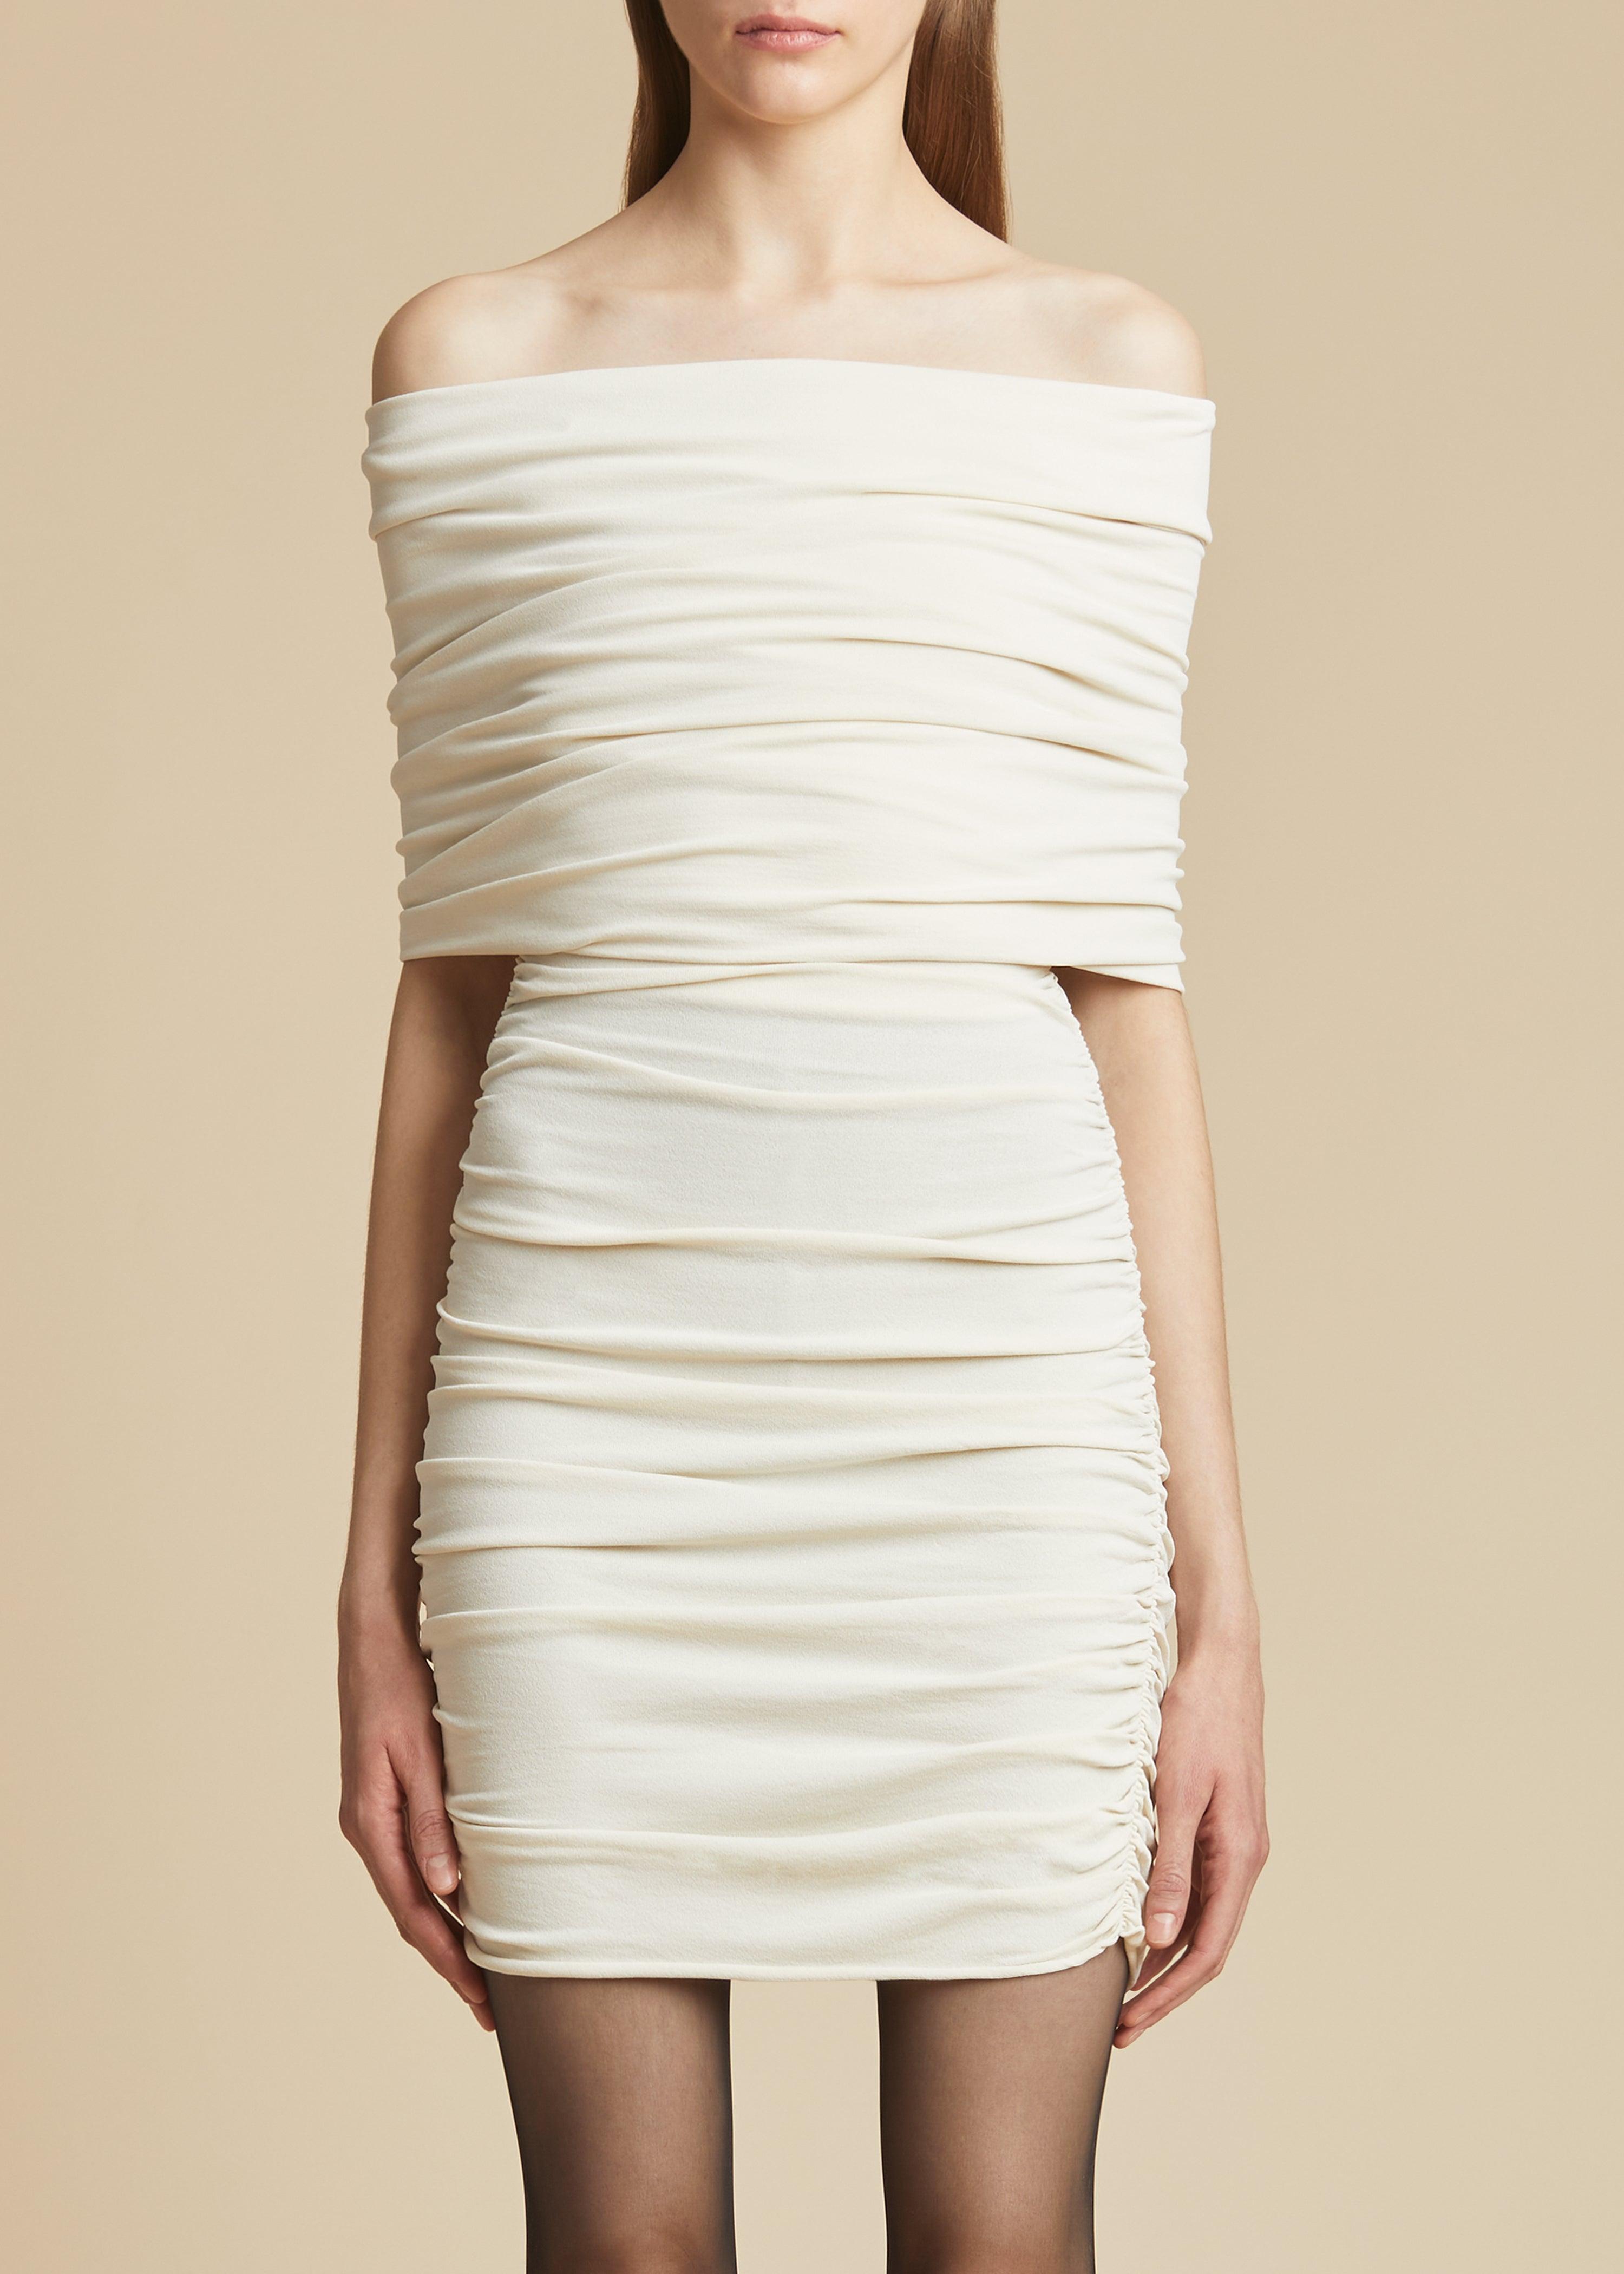 The Aerica Dress in Ivory - The Iconic Issue